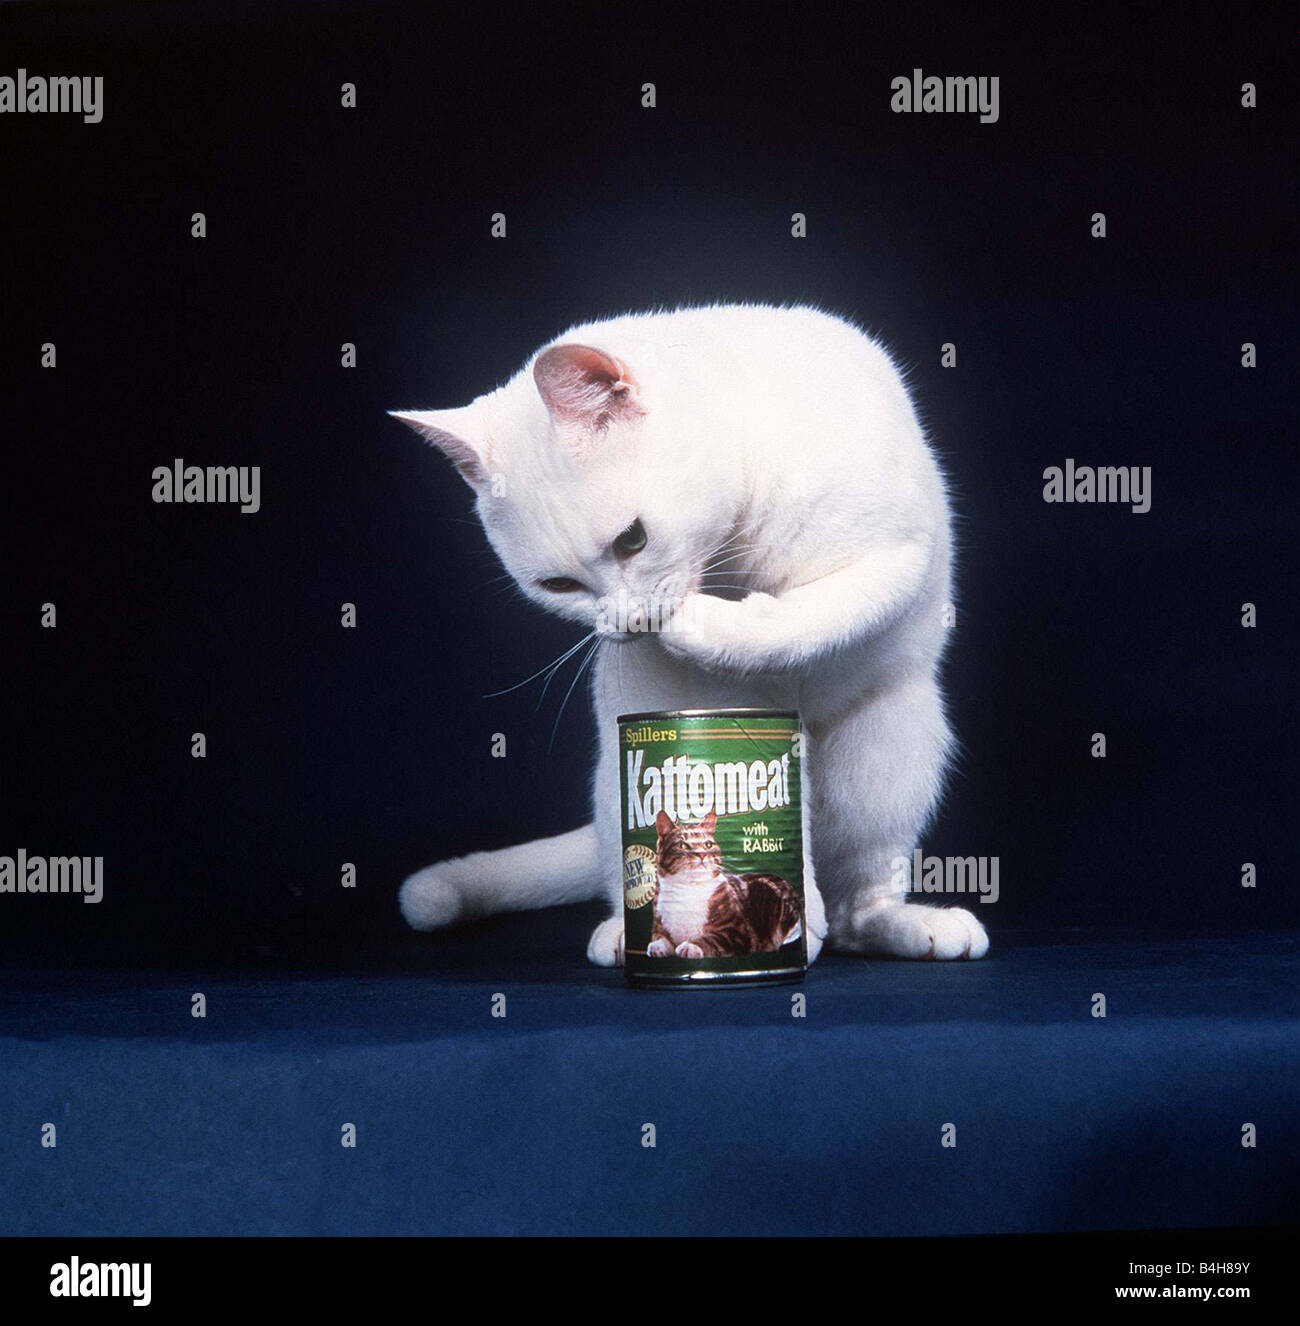 Animals cats Arthur the cat eats his Kattomeat out of the can tin with his  paw circa 1992 Stock Photo - Alamy